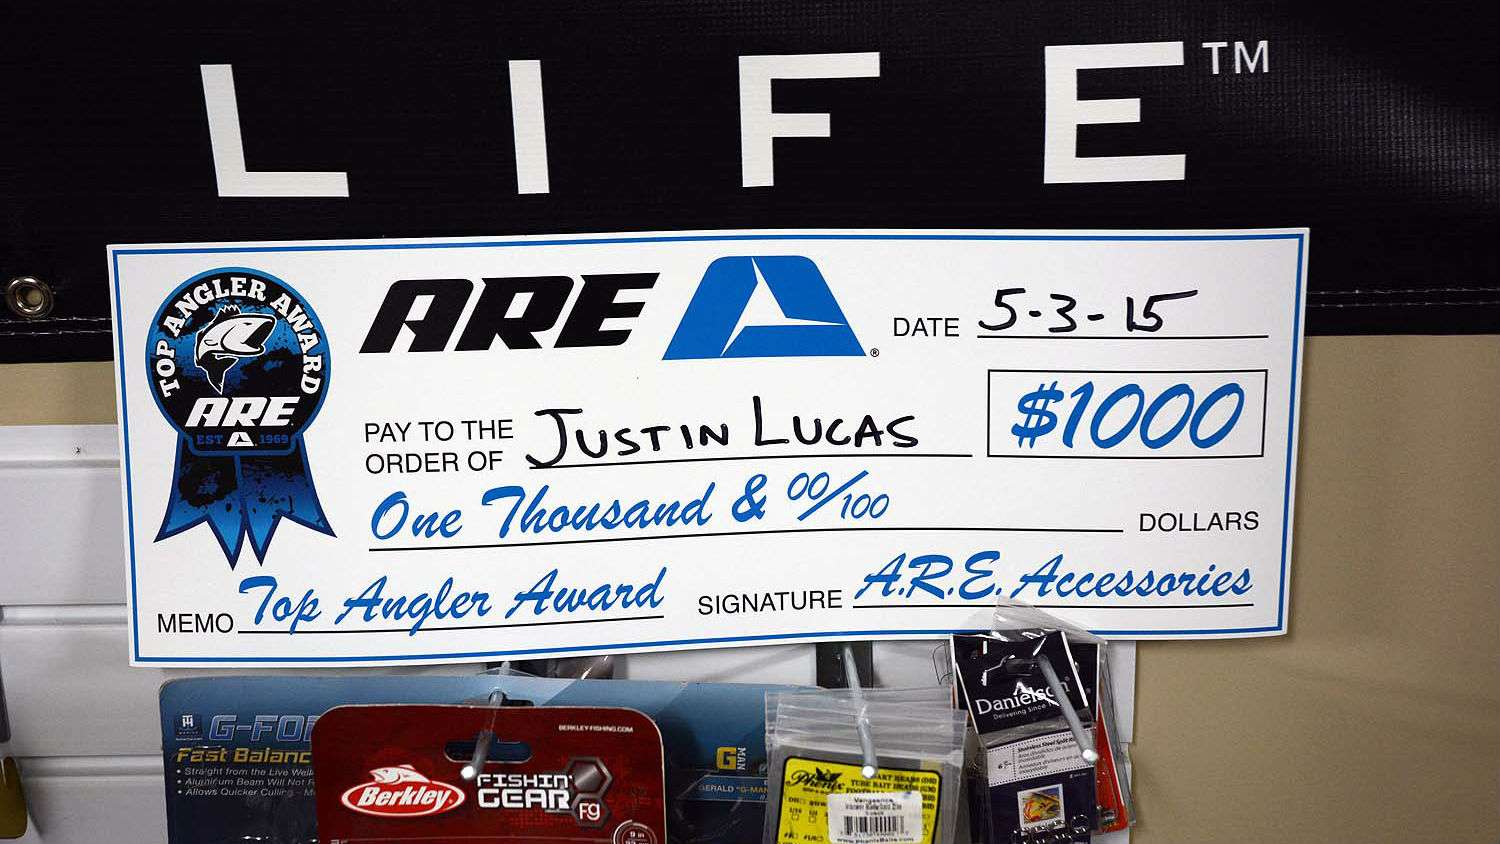 This replica check has special meaning. Lucas won the 2015 Elite Series event held in his hometown of Sacramento. Lucas also was the highest placing angler using A.R.E. accessories on his Tundra. 